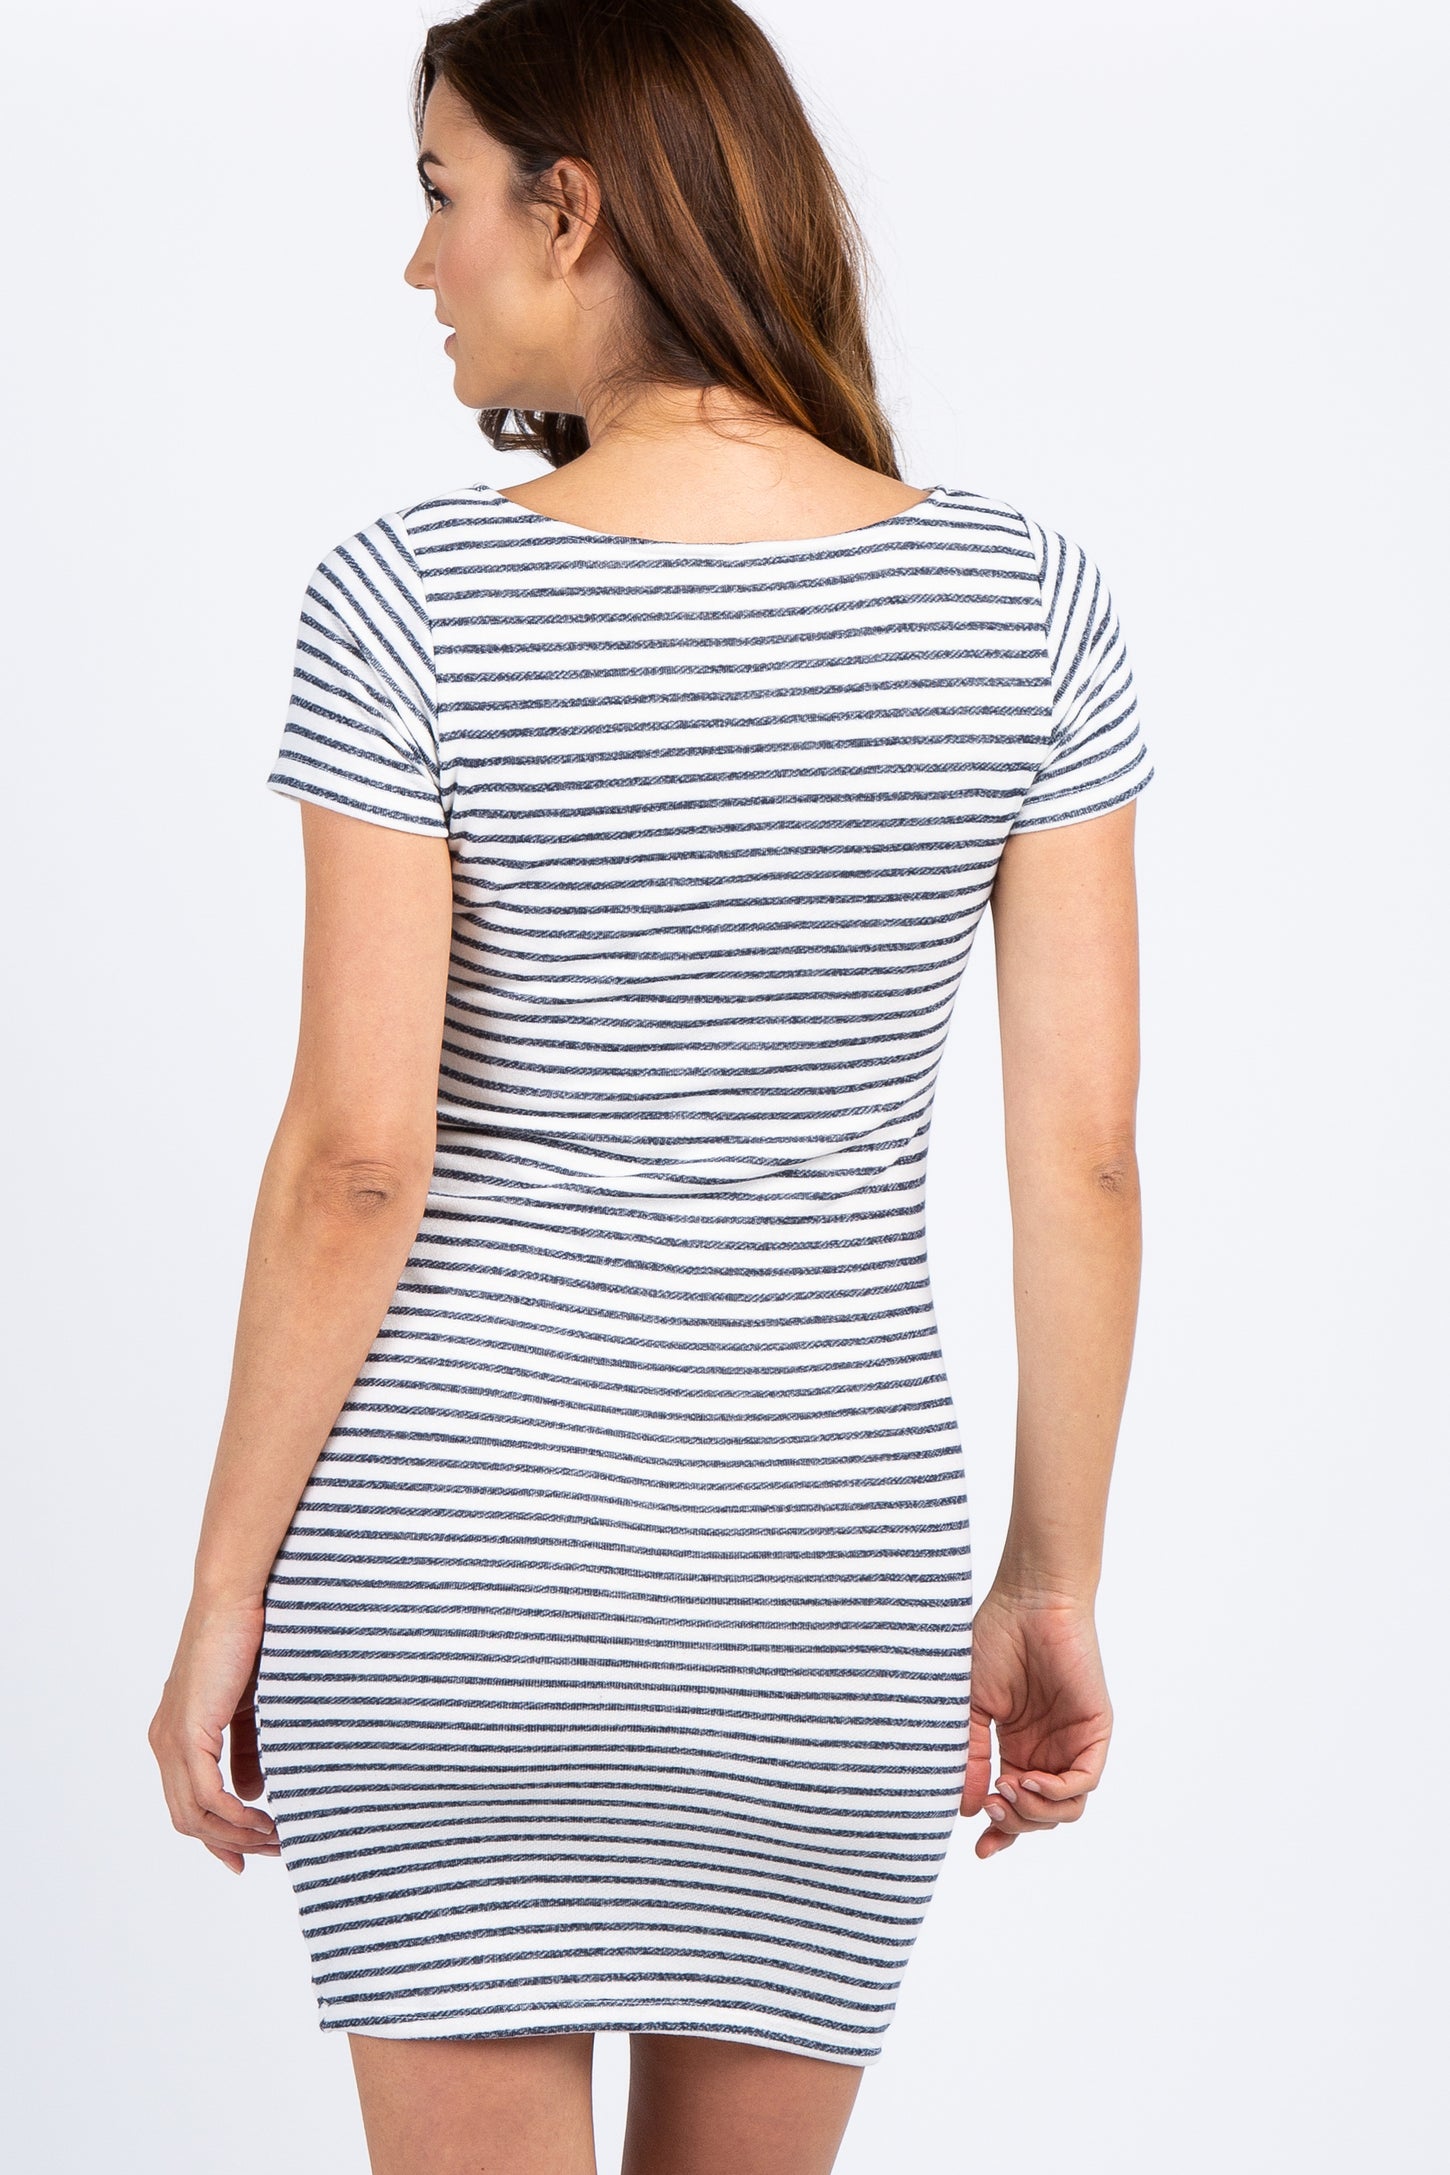 PinkBlush Ivory Navy Striped Fitted Short Sleeve Maternity Dress